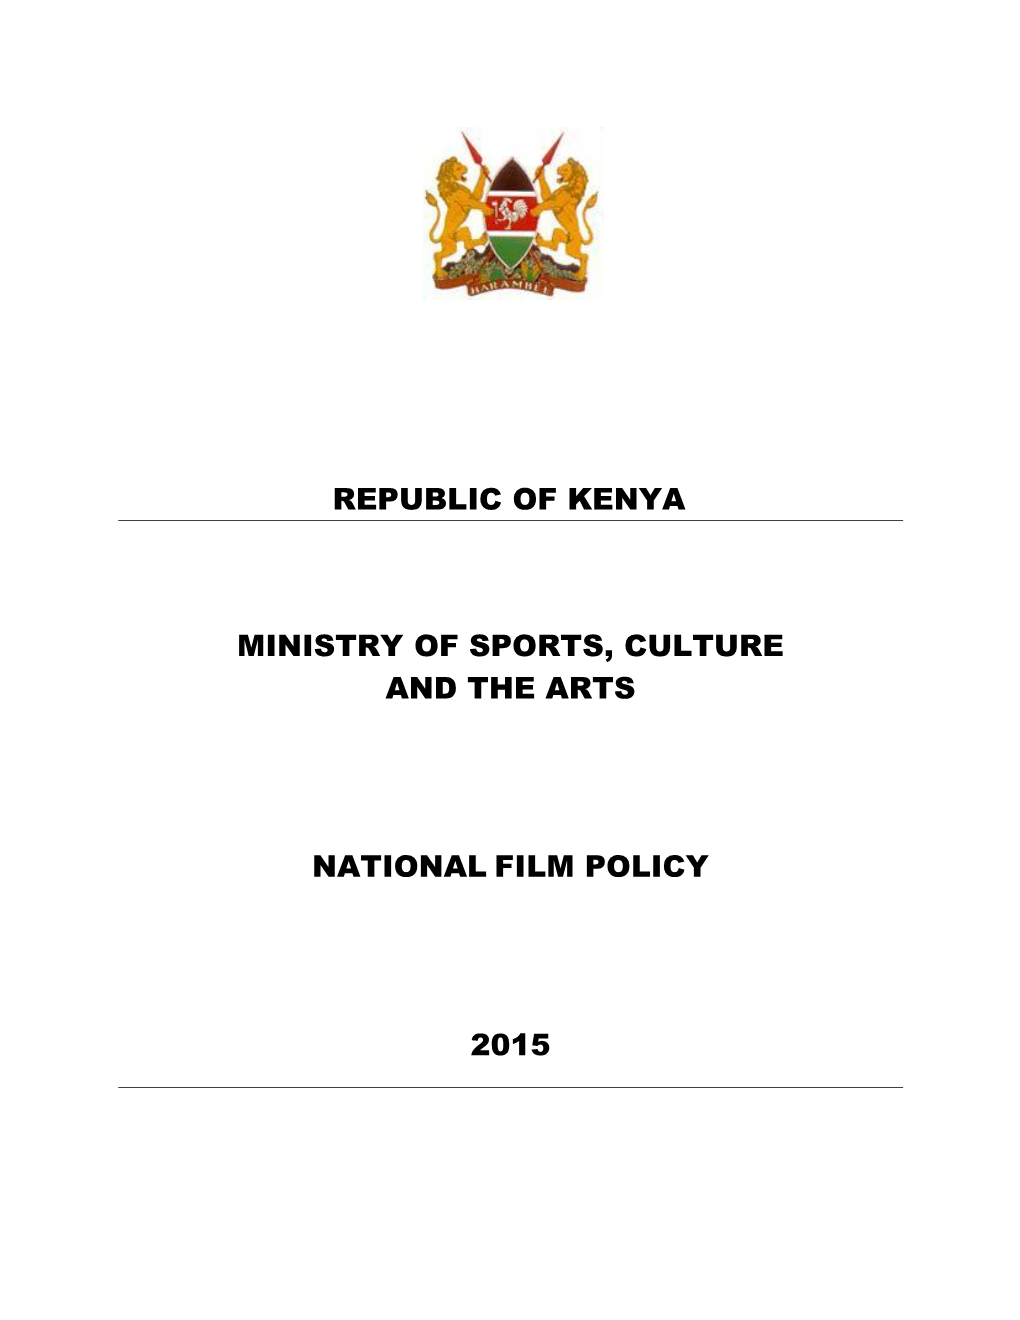 Republic of Kenya Ministry of Sports, Culture and The